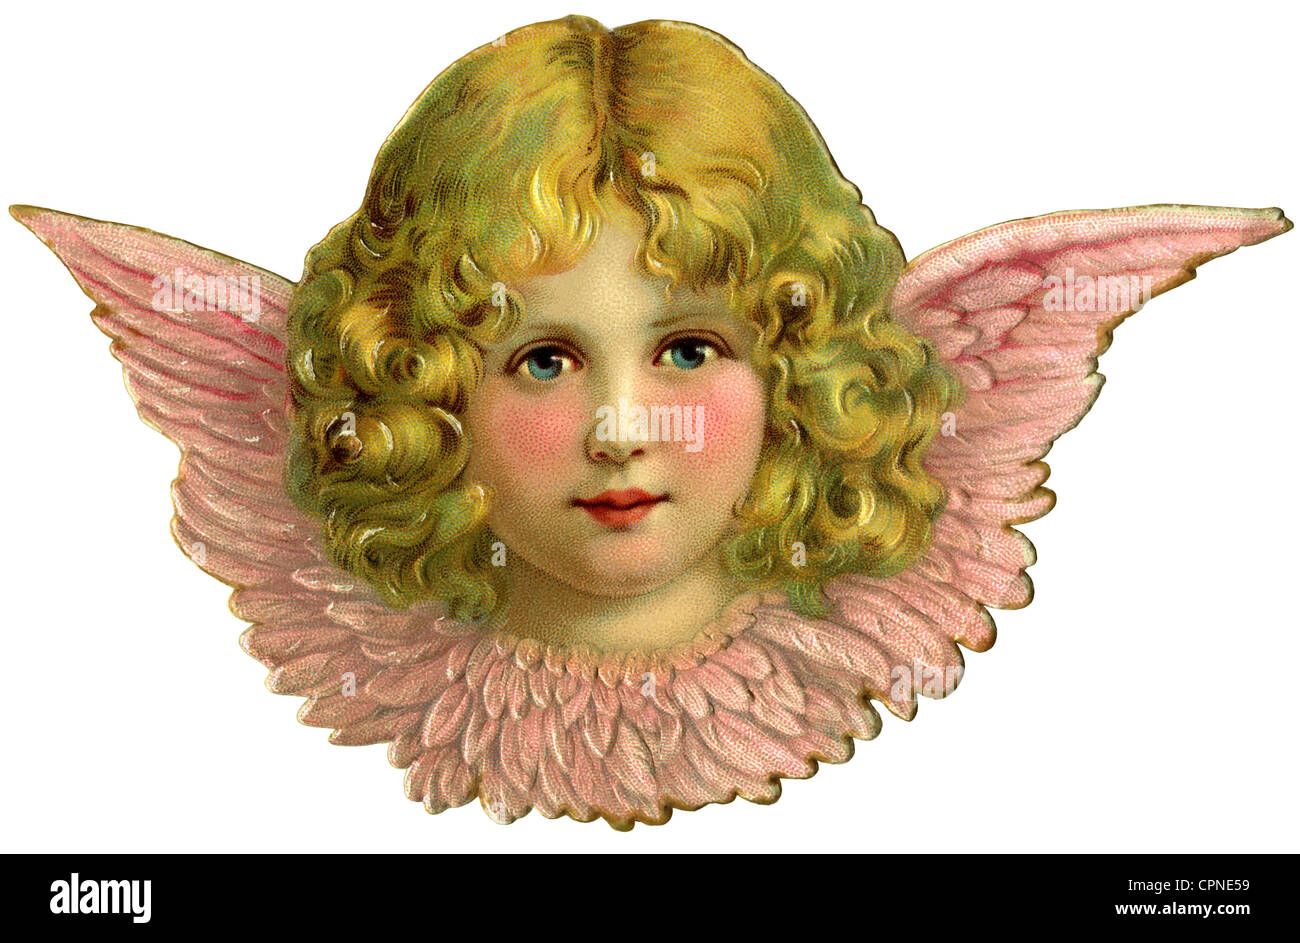 Kitsch, cherub, scrap-picture, Germania, 1908, Additional-Rights-clearences-not available Foto Stock